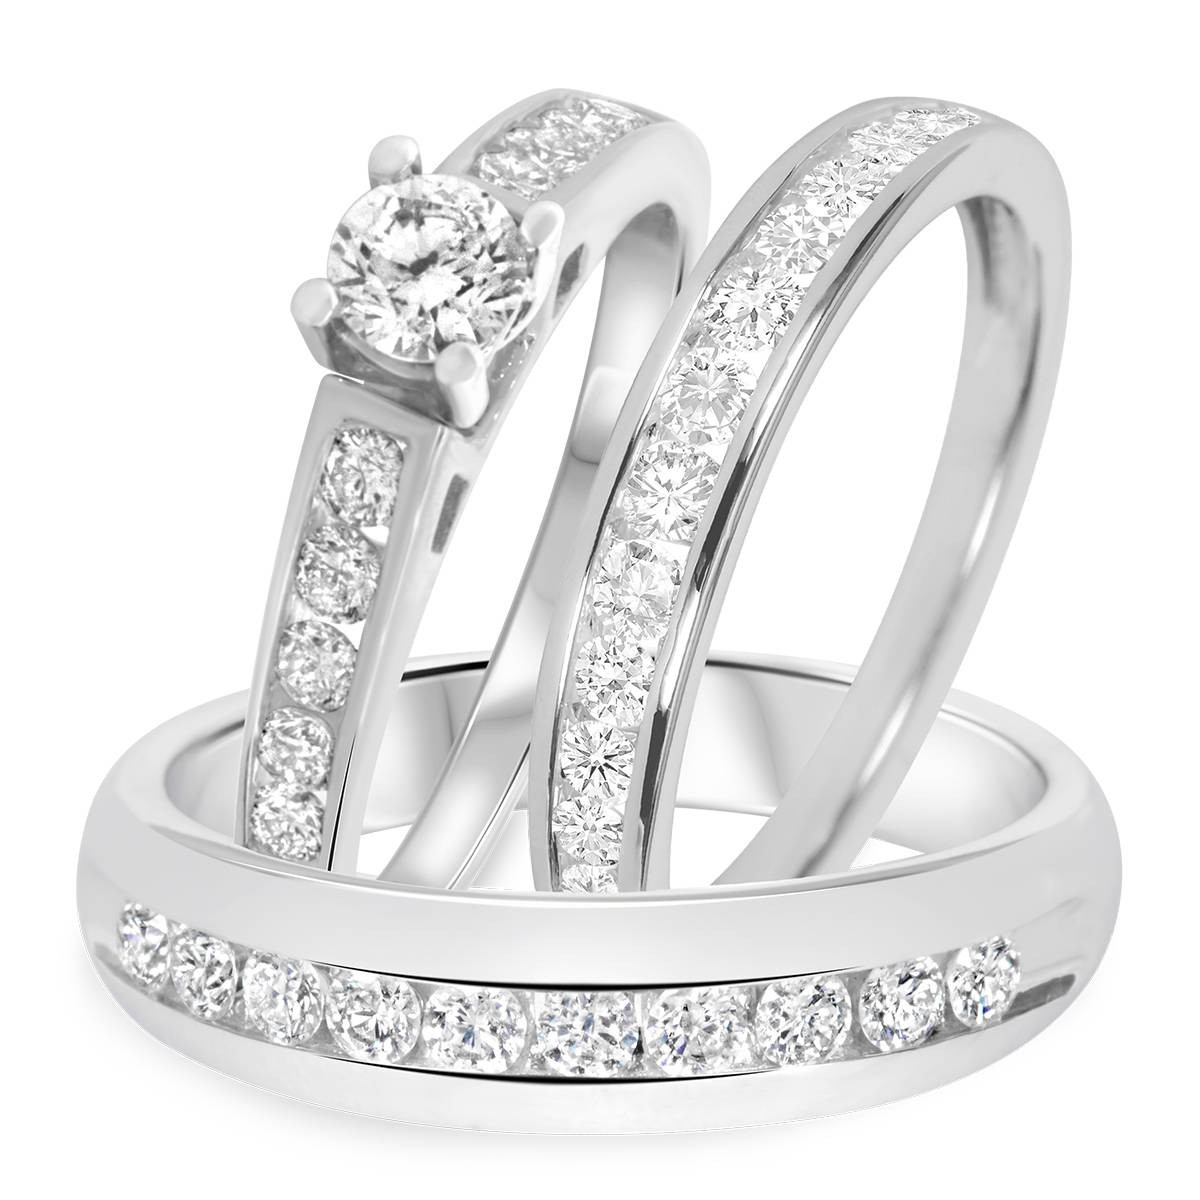 Wedding Rings Trio Sets For Cheap
 15 Inspirations of Cheap Wedding Bands Sets His And Hers